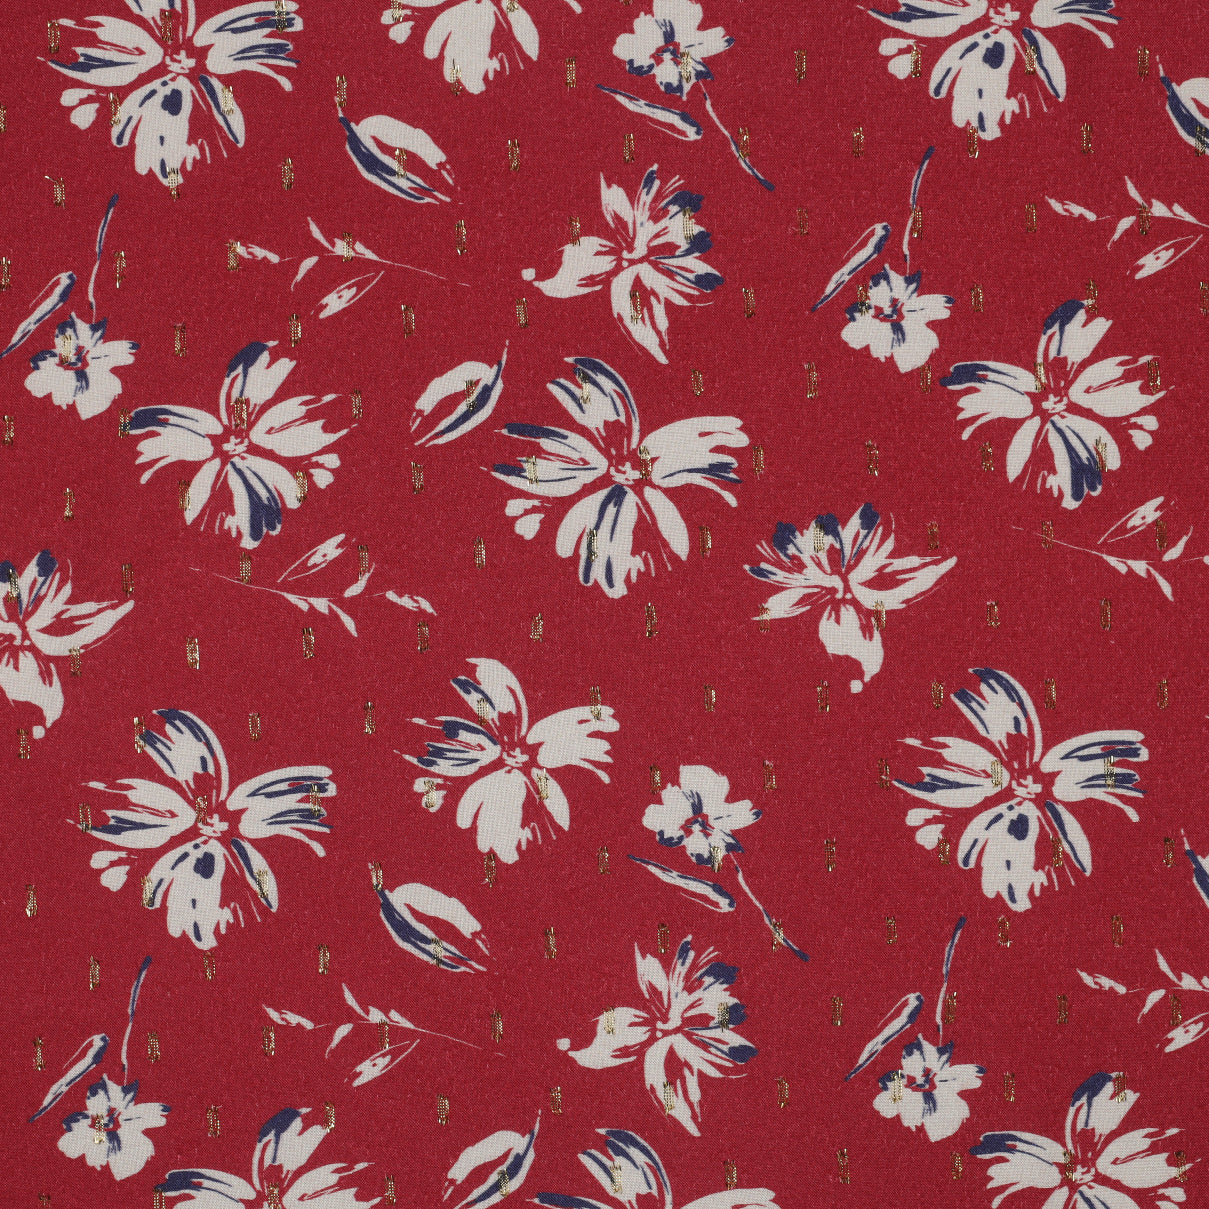 Flowers on Red with Lurex Viscose Fabric